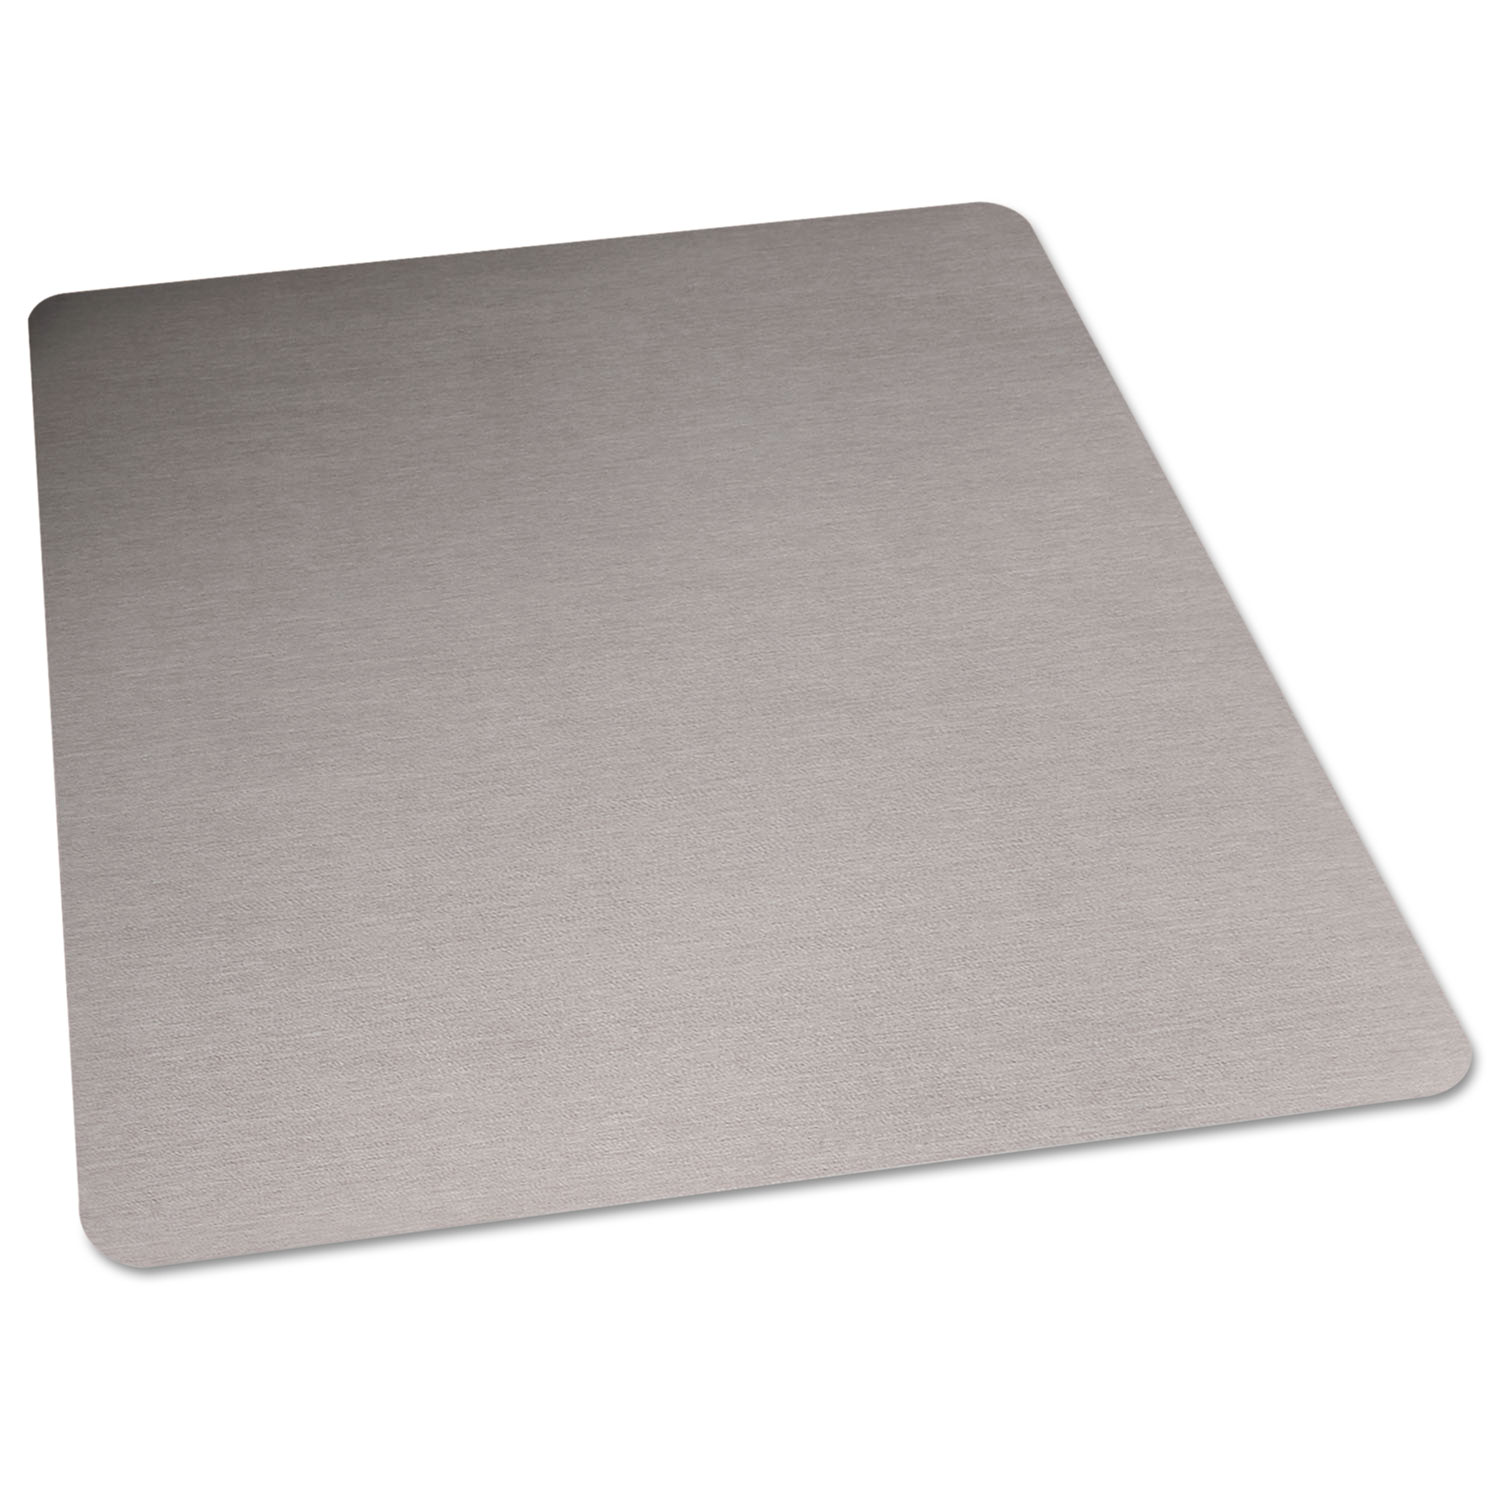 Stainless 60x46 Rectangle Chair Mat, Design Series for Carpet up to 3/4